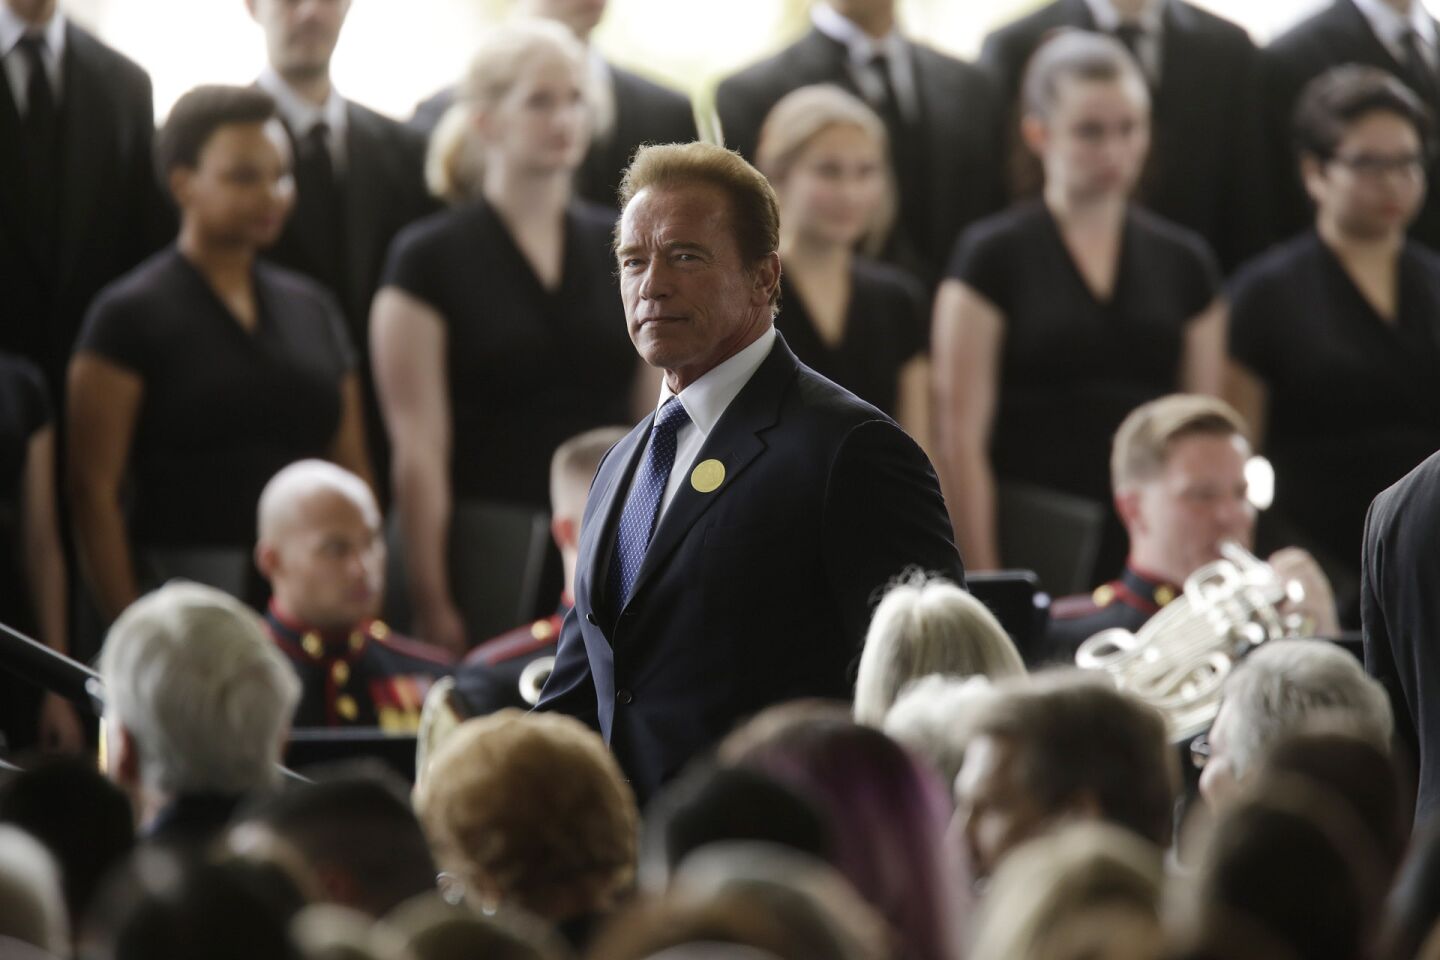 Former California Gov. Arnold Schwarzenegger arrives for the funeral of former First Lady Nancy Reagan at the Ronald Reagan Presidential Library in Simi Valley.